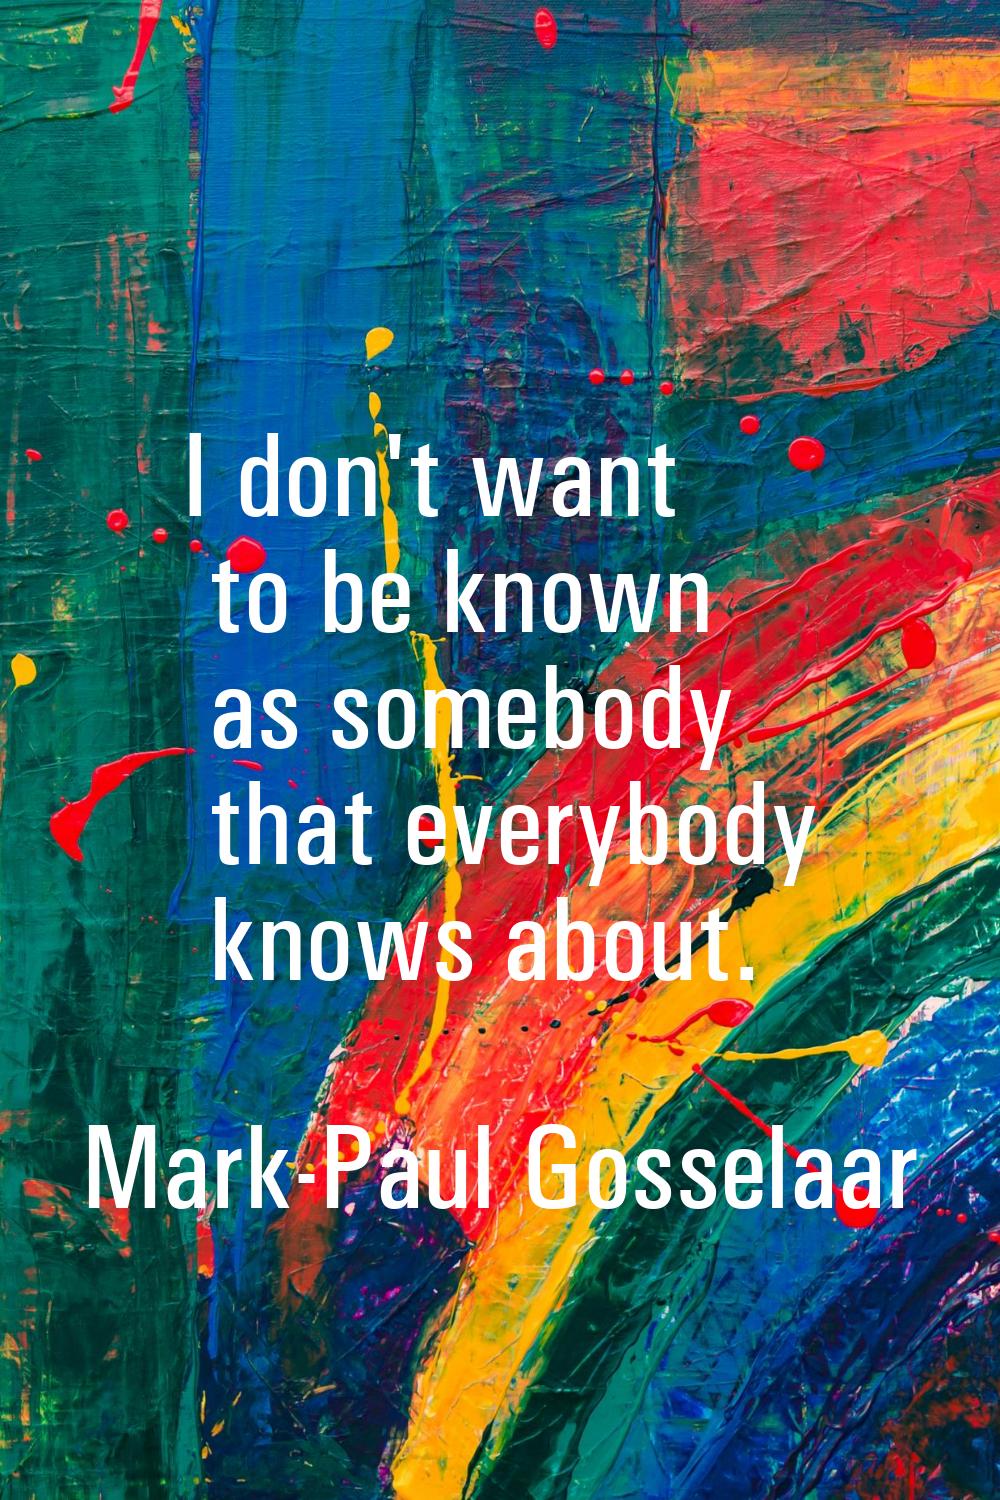 I don't want to be known as somebody that everybody knows about.